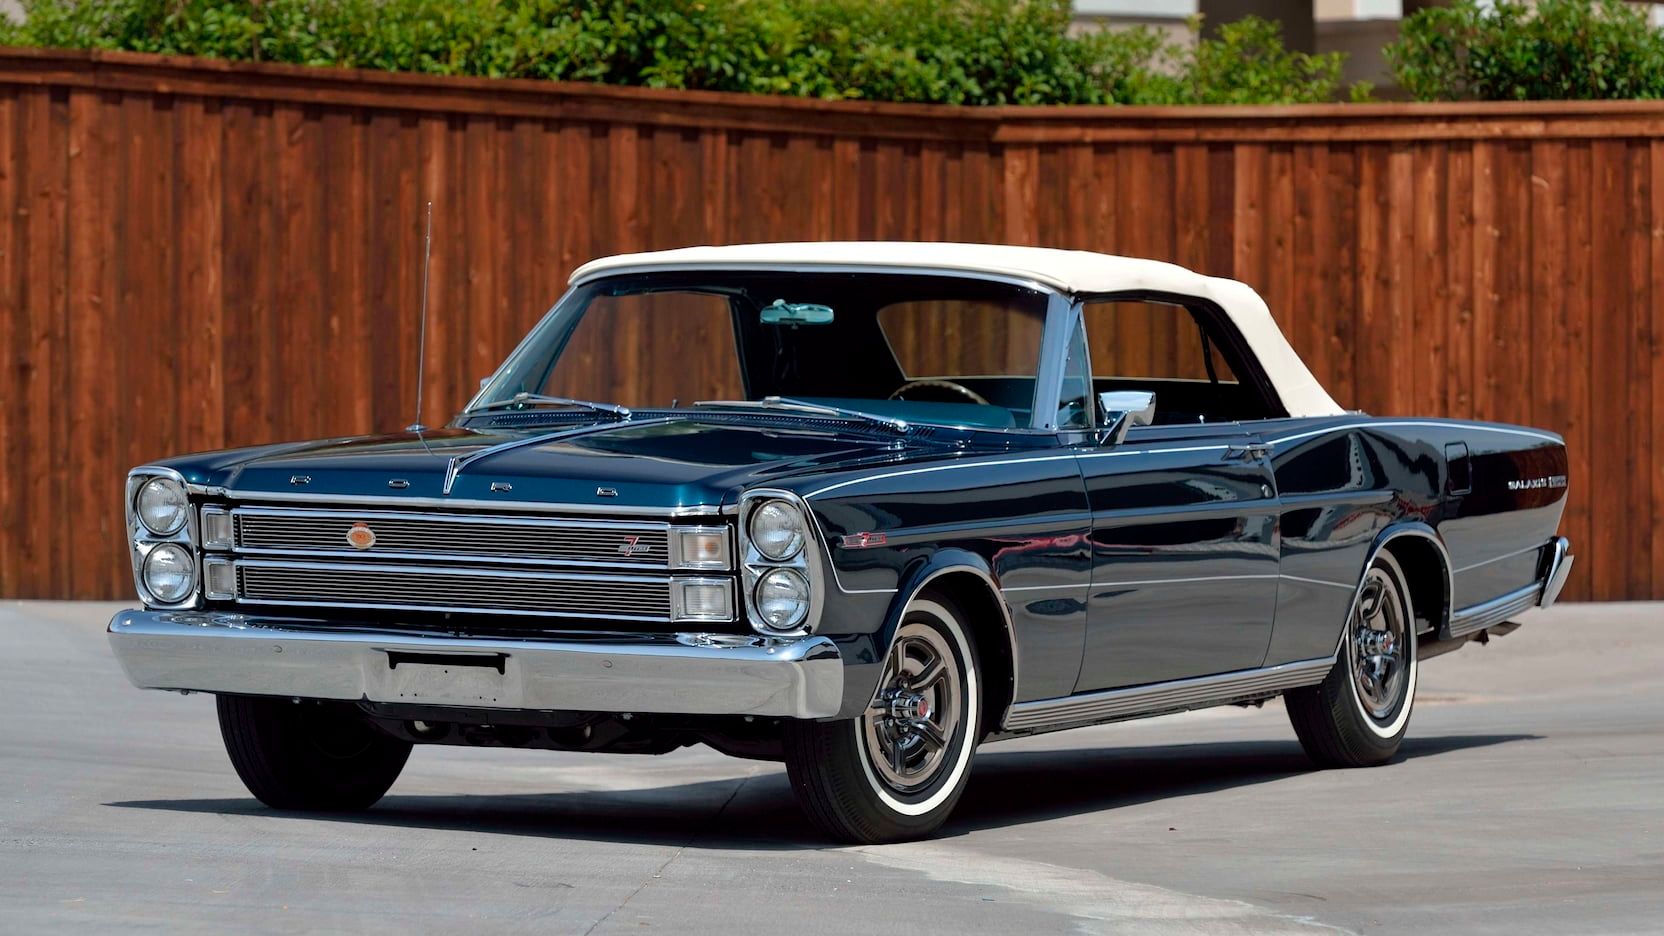 Things That Made The Ford Galaxie Litre A Fantastic Muscle Car